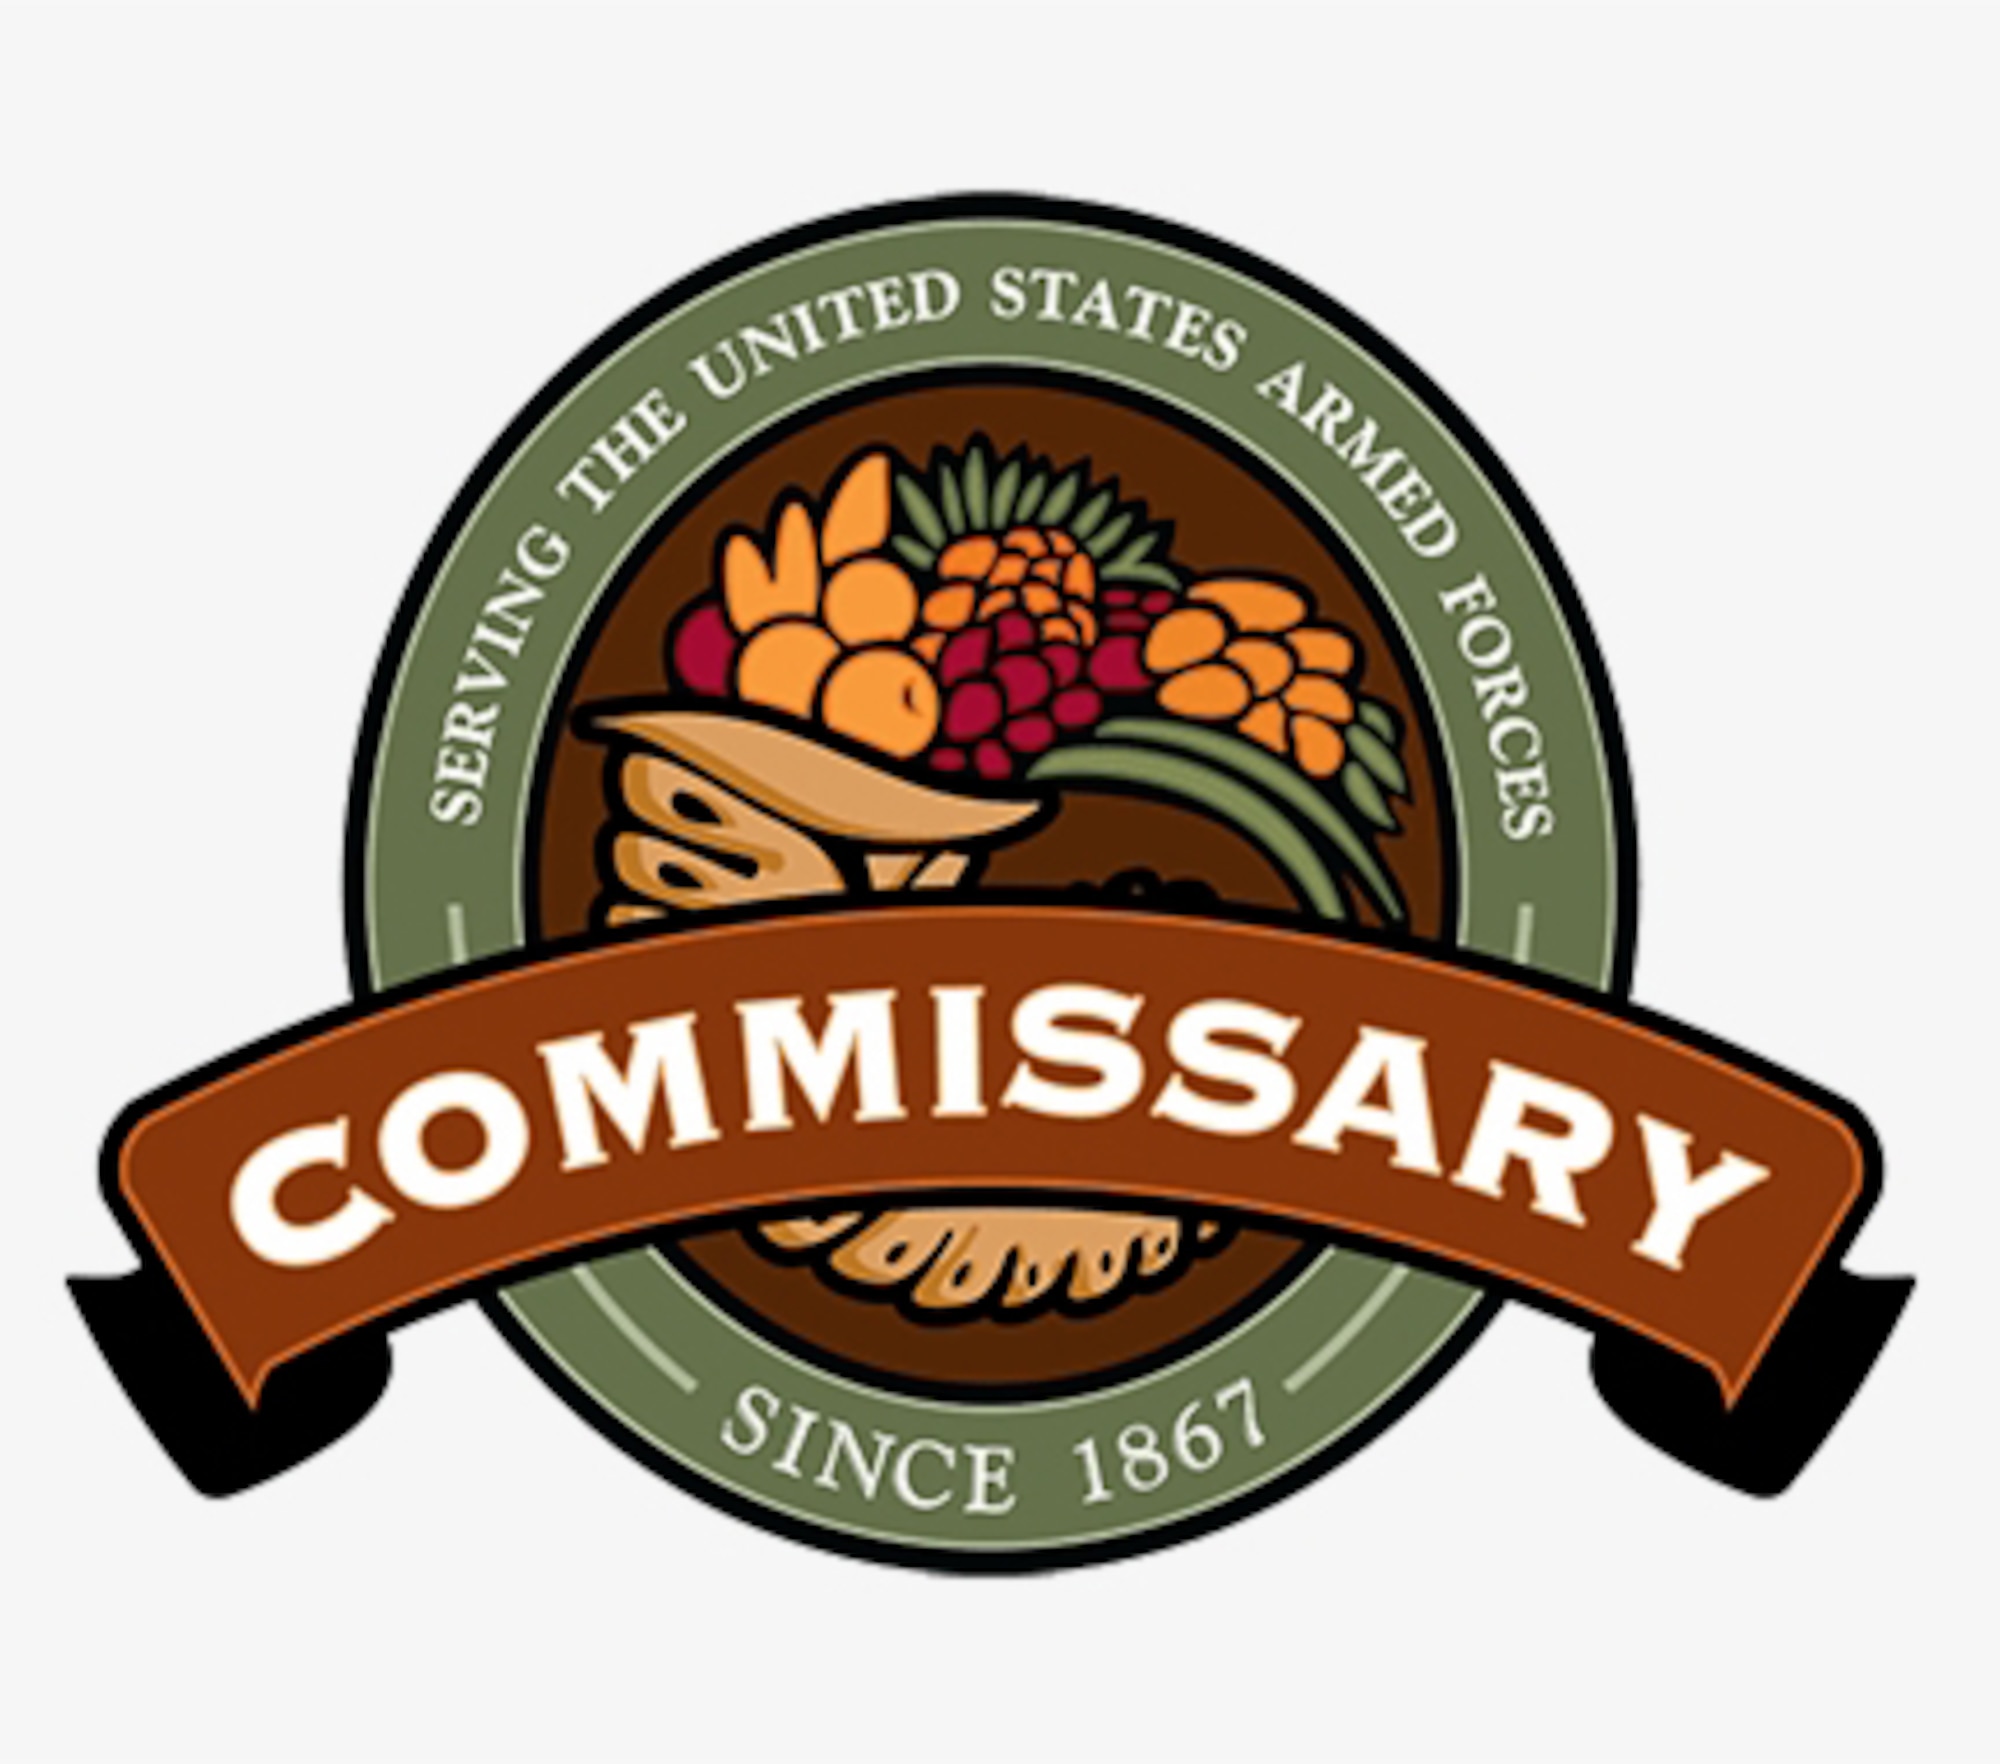 Military customers worldwide will be able to evaluate their stores through the annual Commissary Customer Service Survey, or CCSS, starting Aug. 22.